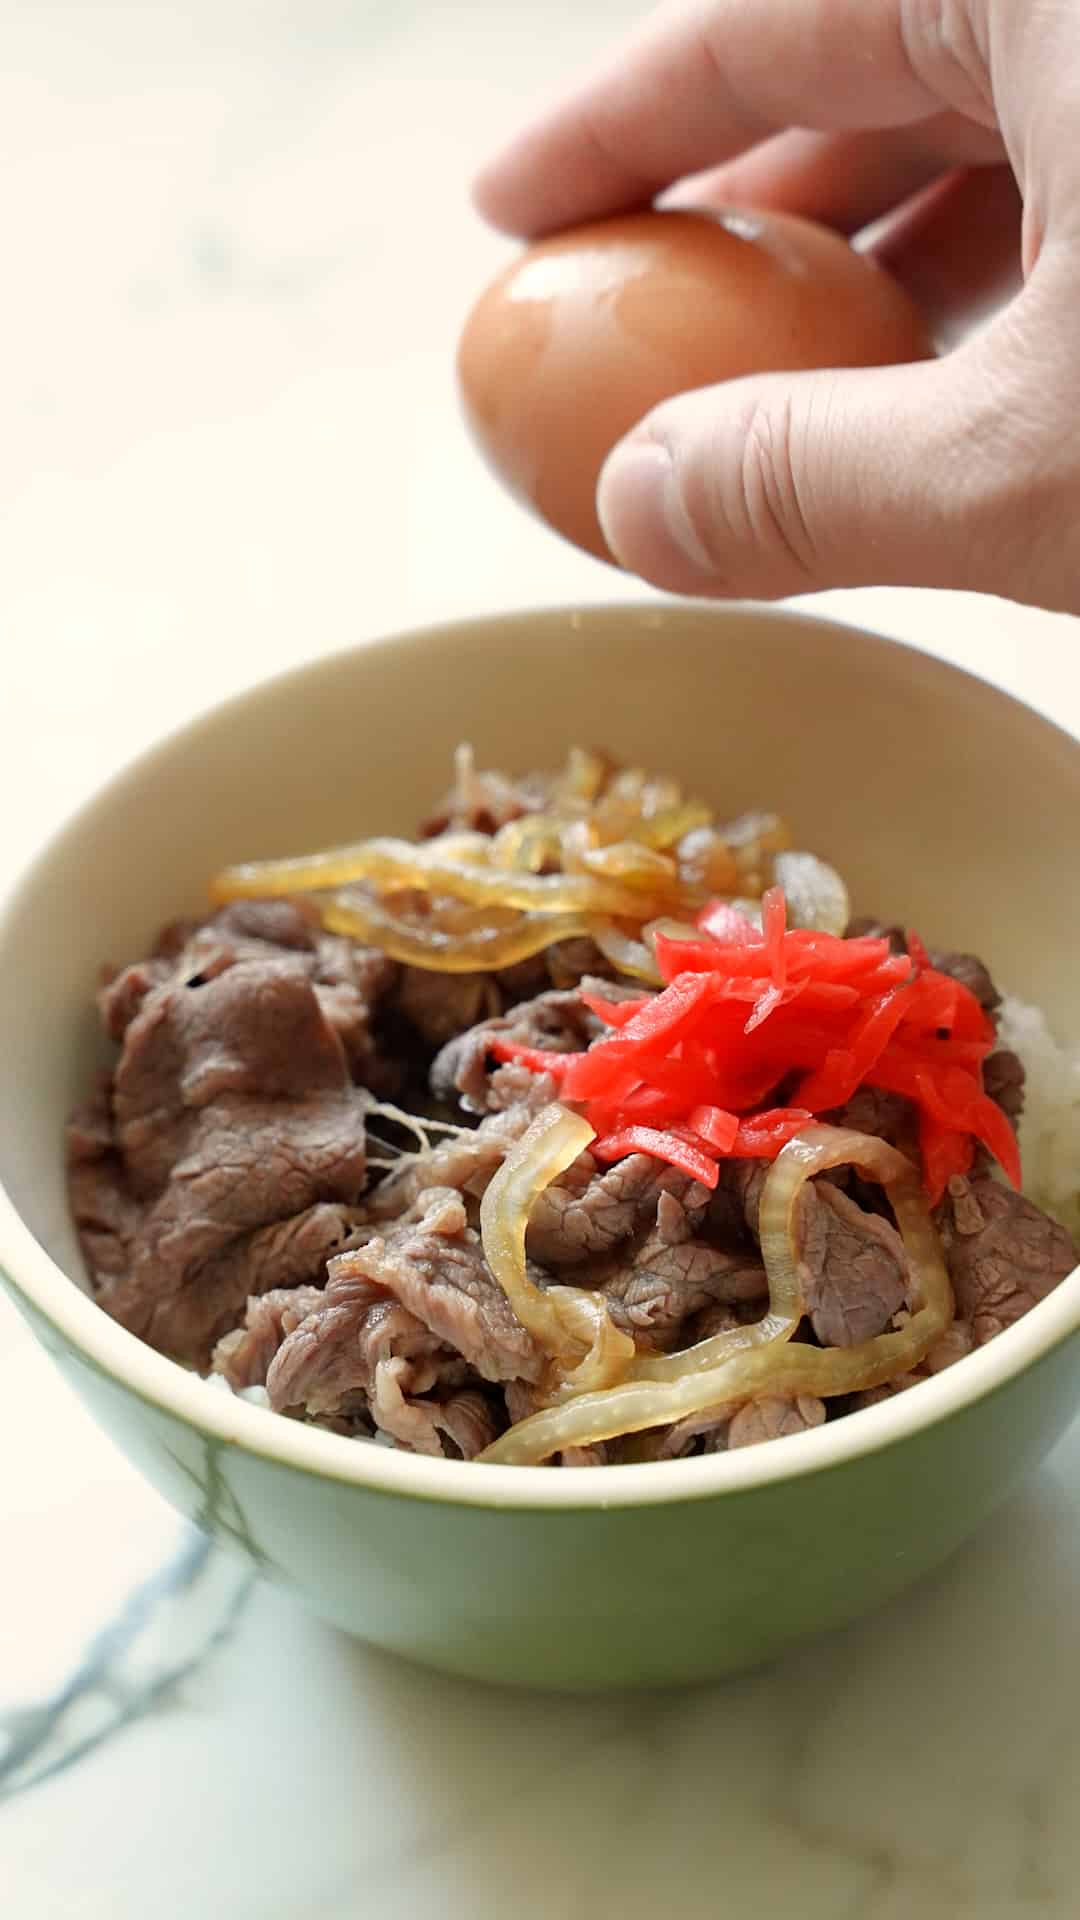 Beef gyudon in a green bowl with onions over rice.